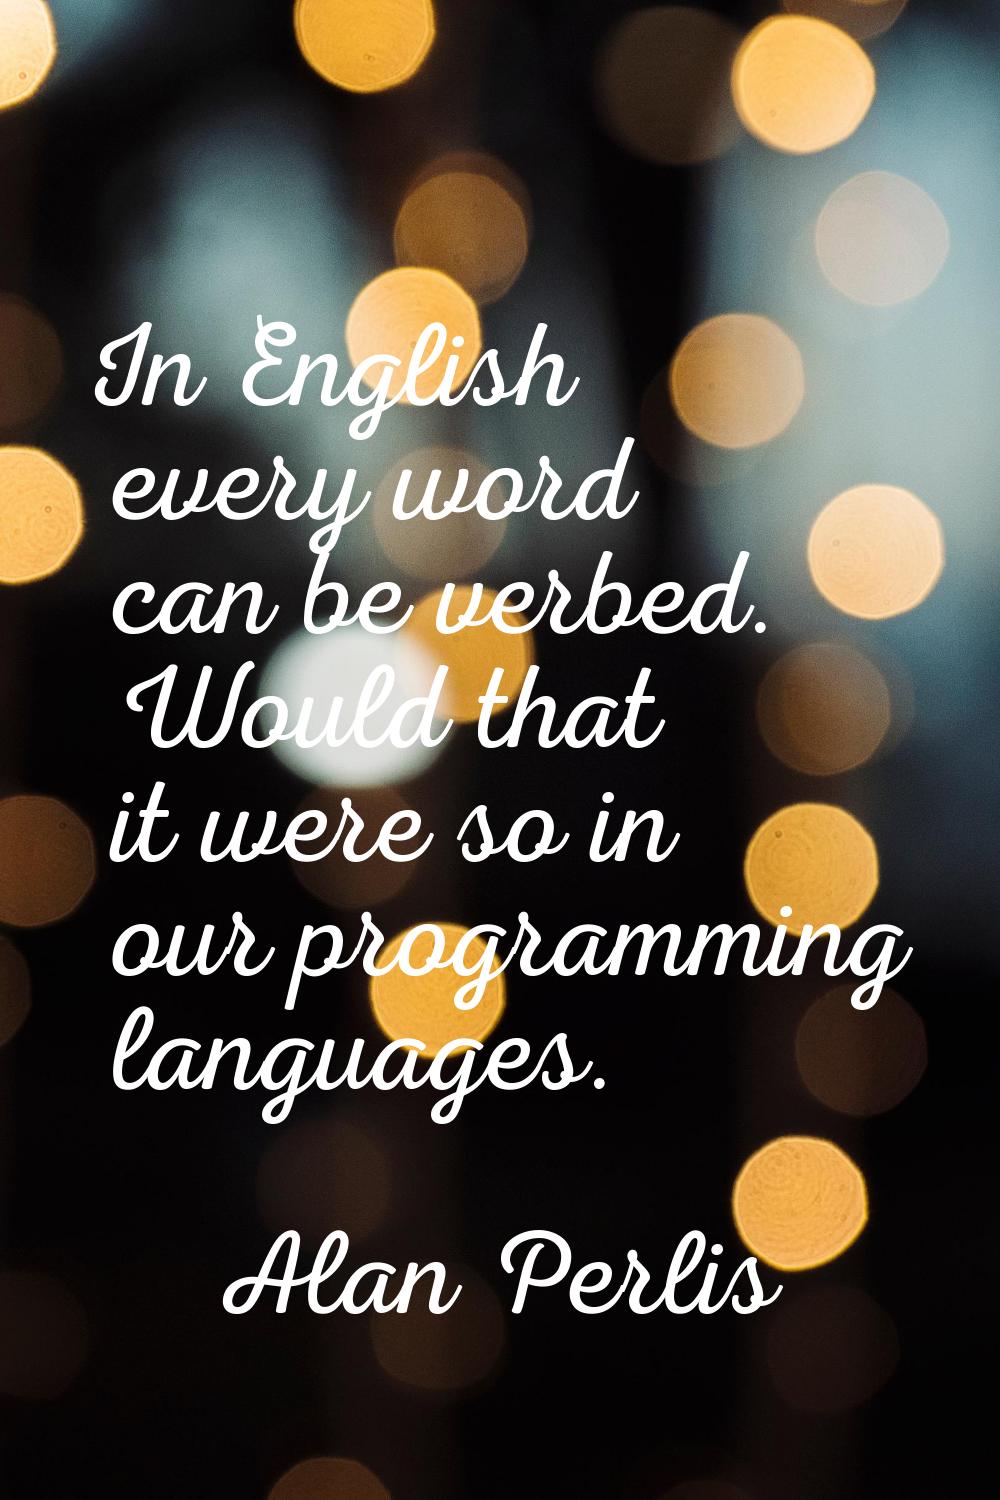 In English every word can be verbed. Would that it were so in our programming languages.